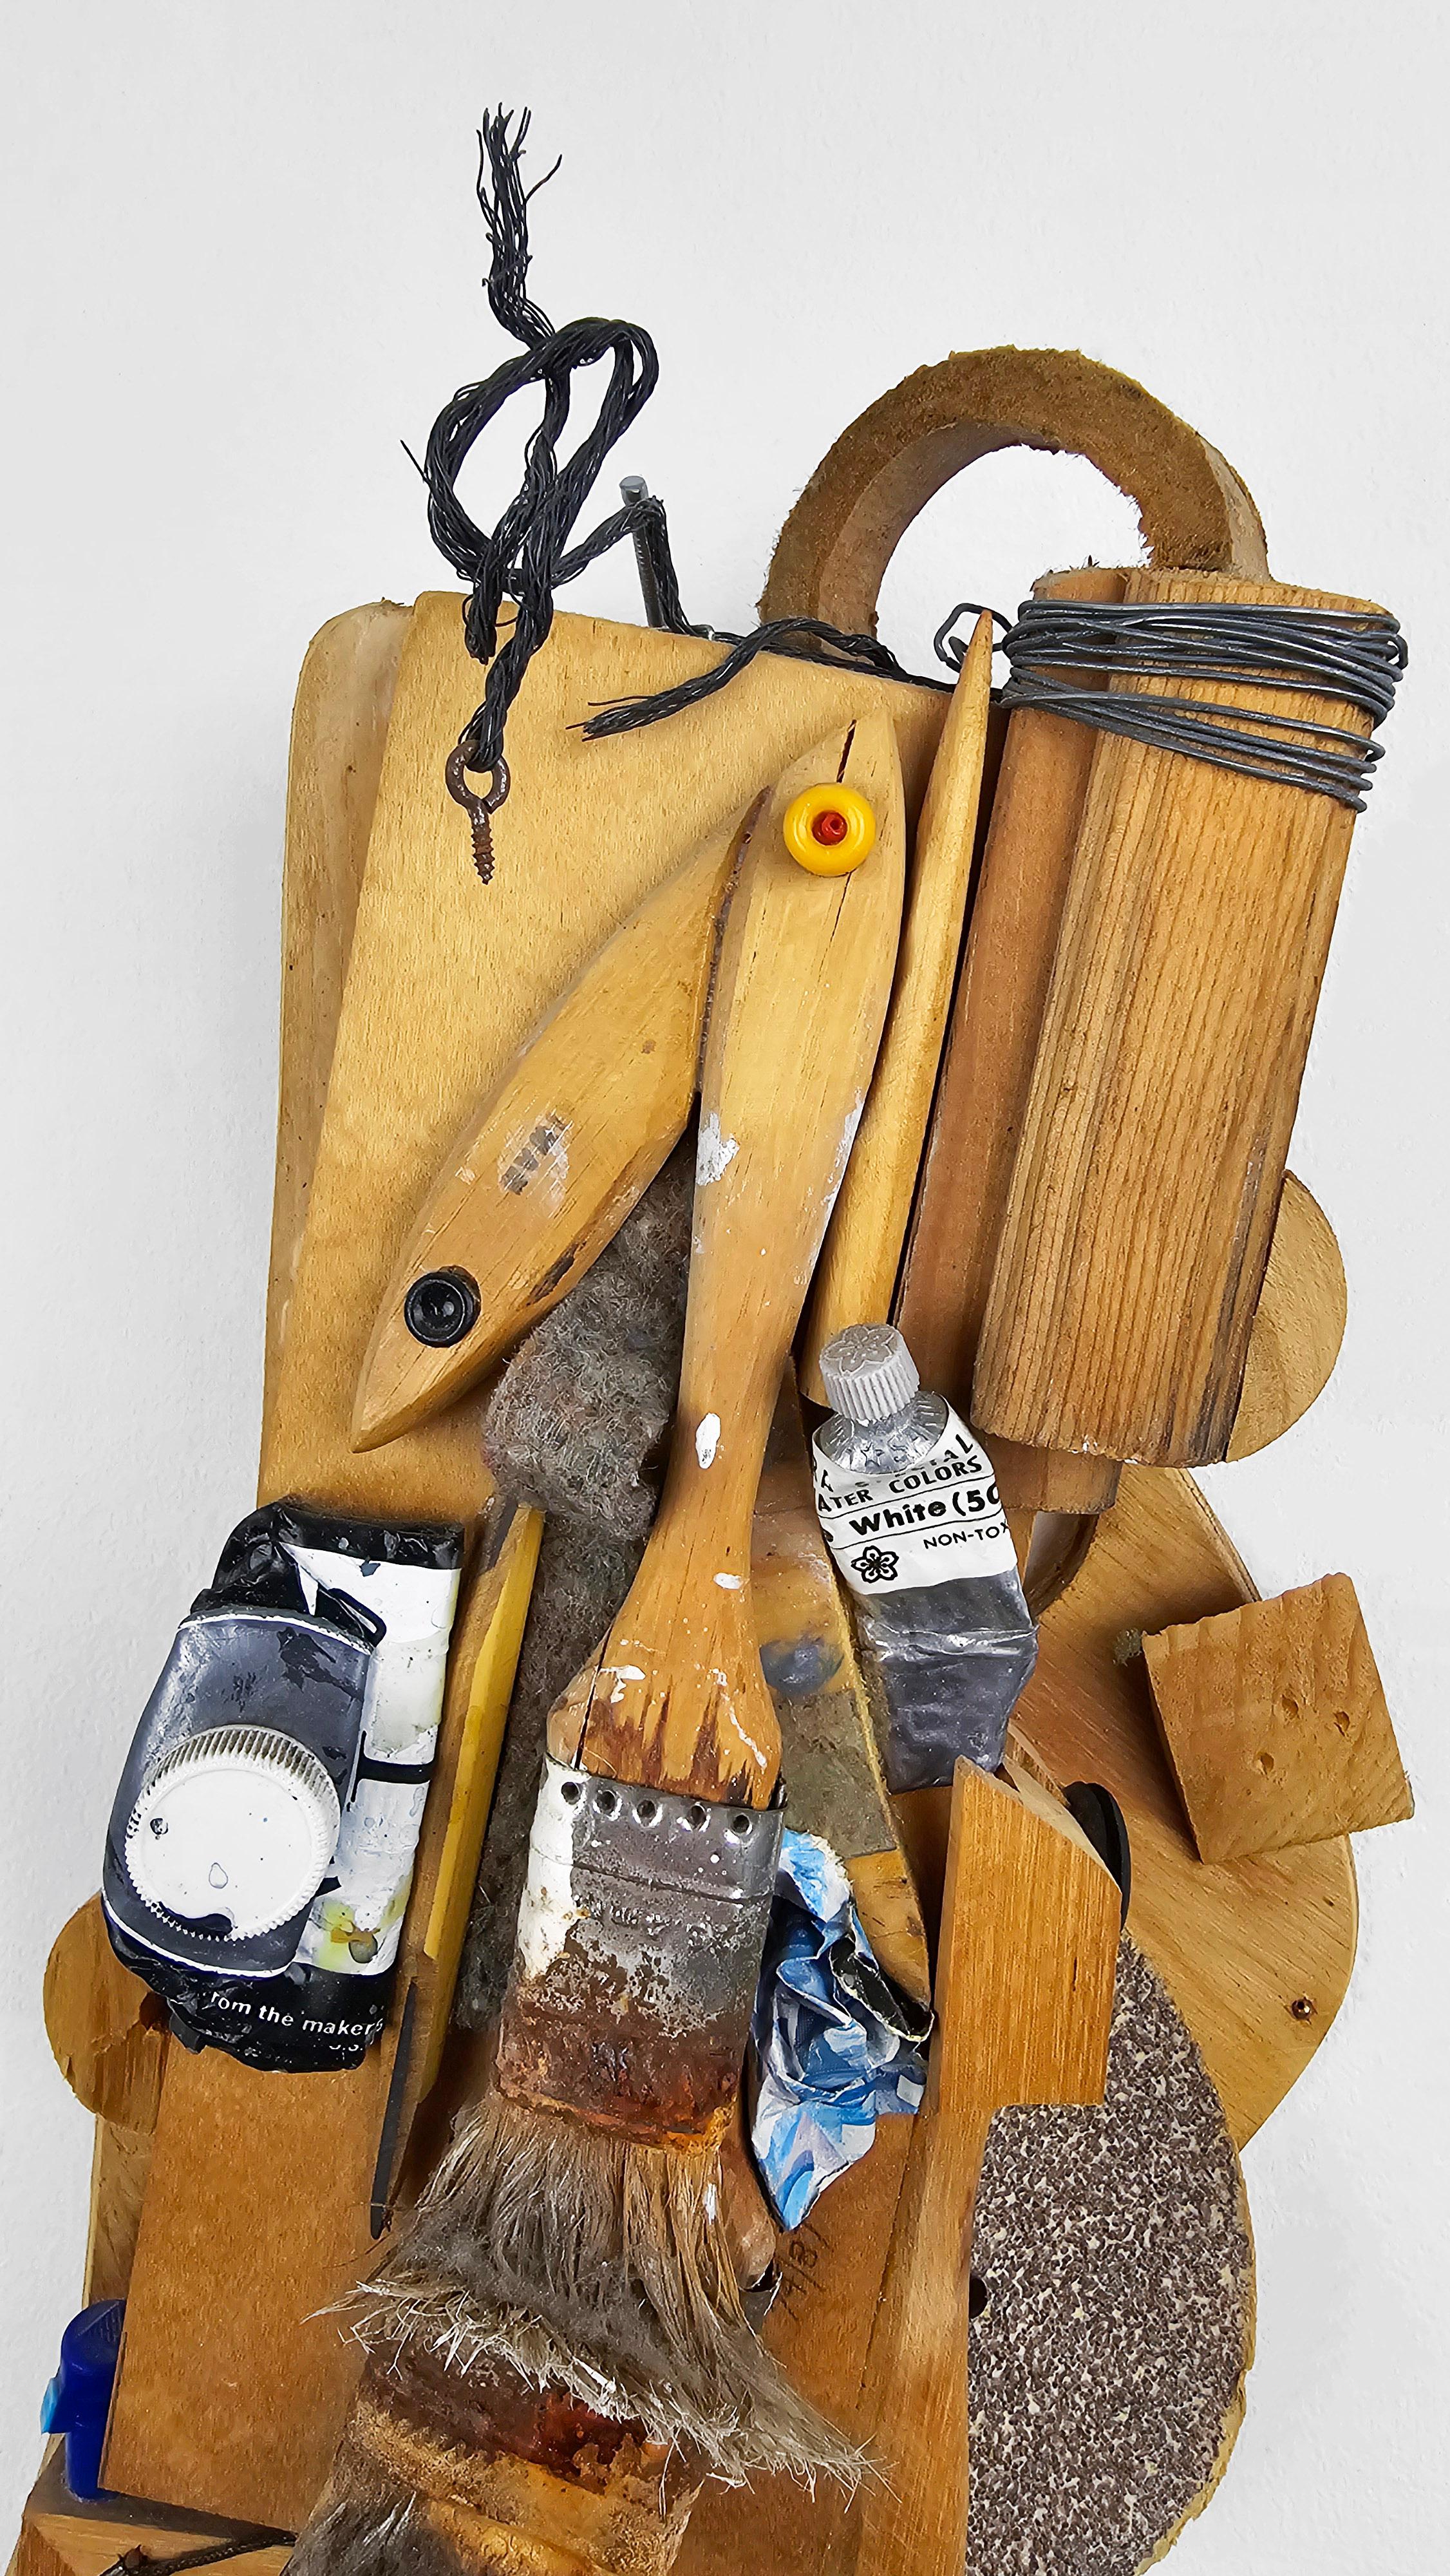 Linda Stein, Intimate Duo 134 - Mixed Media Assemblage Contemporary Art Wall Sculpture

Intimate Duo 134 is from artist Linda Stein's Brush Assemblage series, where she combines found objects, including brushes, to form wall sculptures.

Stein's